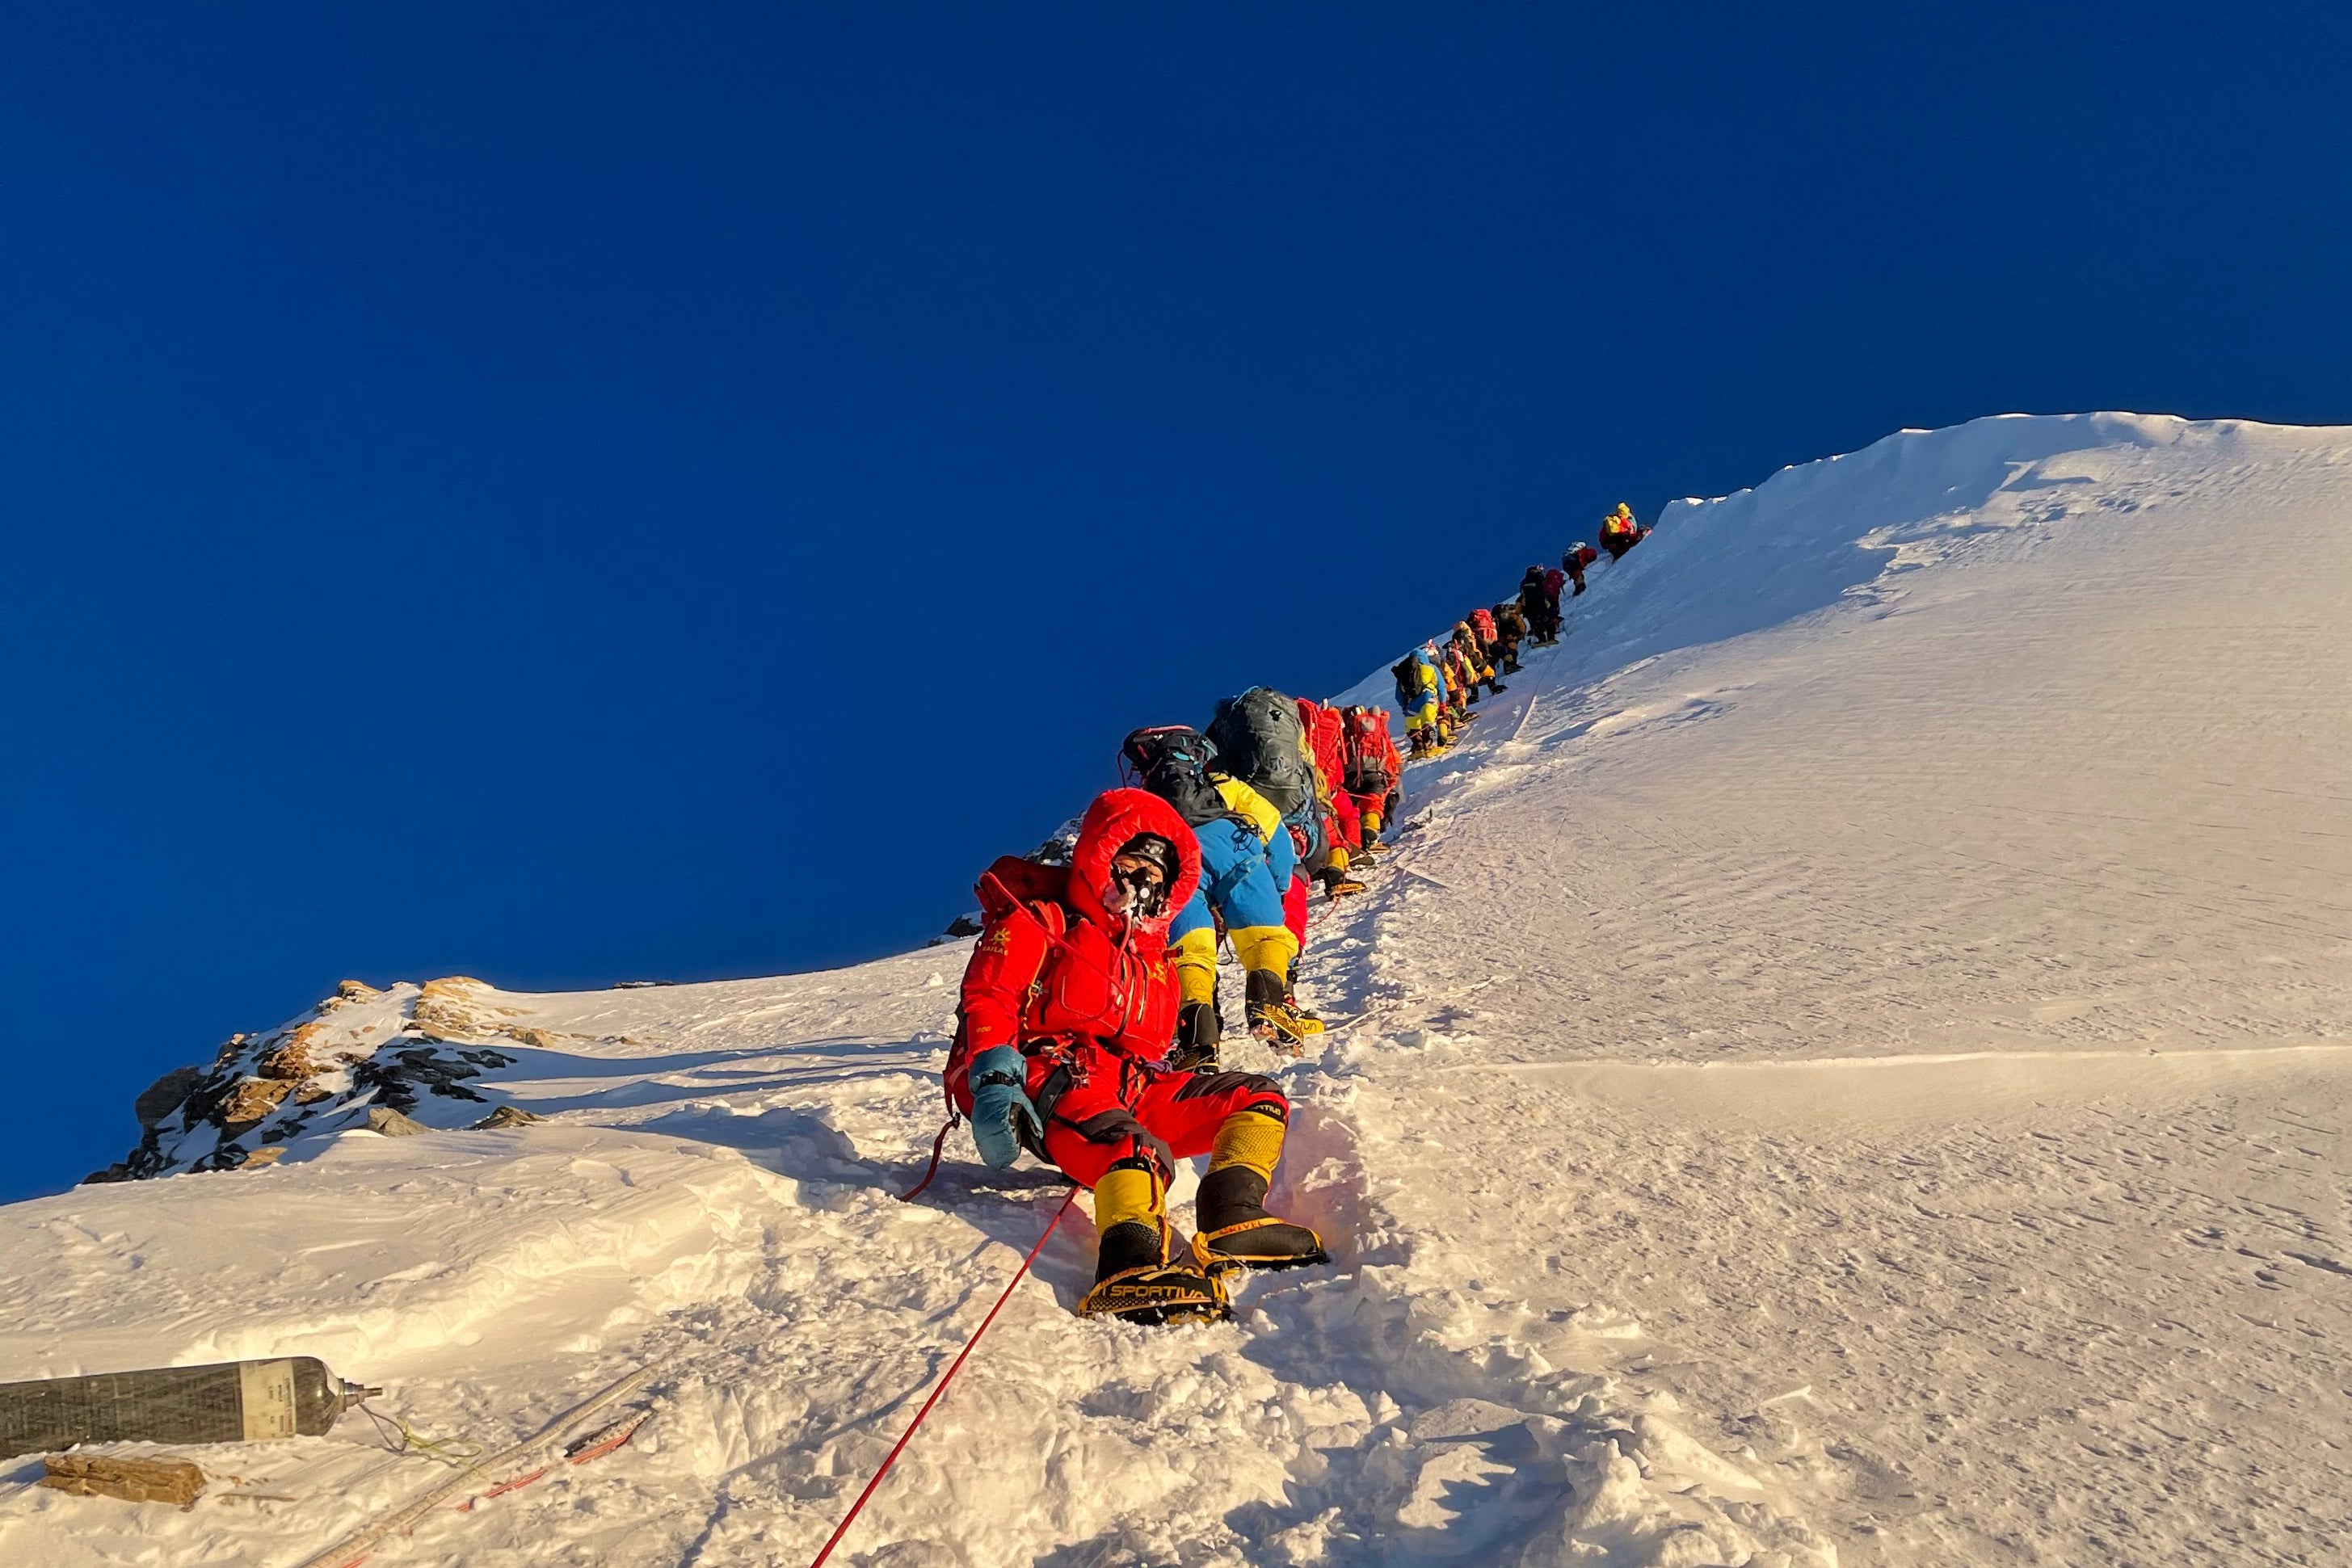 This photograph taken on 12 May shows mountaineers as they climb during their ascent to Mount Everest’s 8,849m high summit